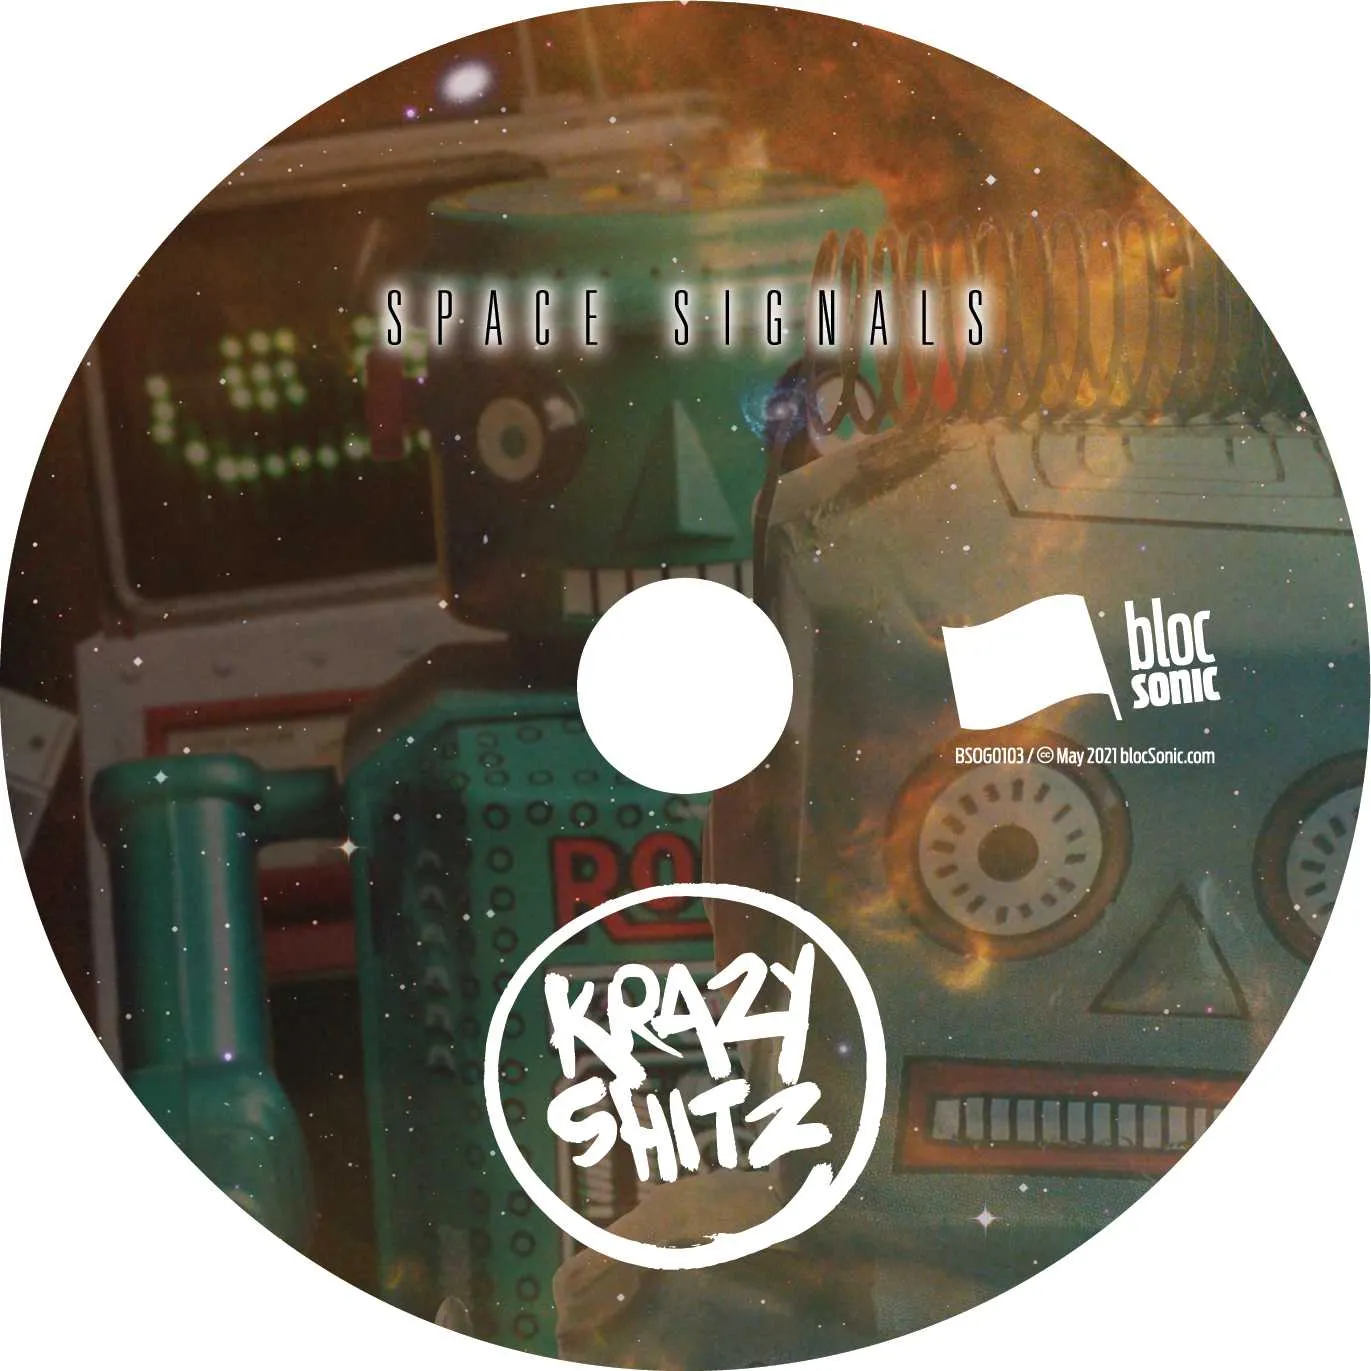 Album disc for “Space Signals” by Krazy Shitz